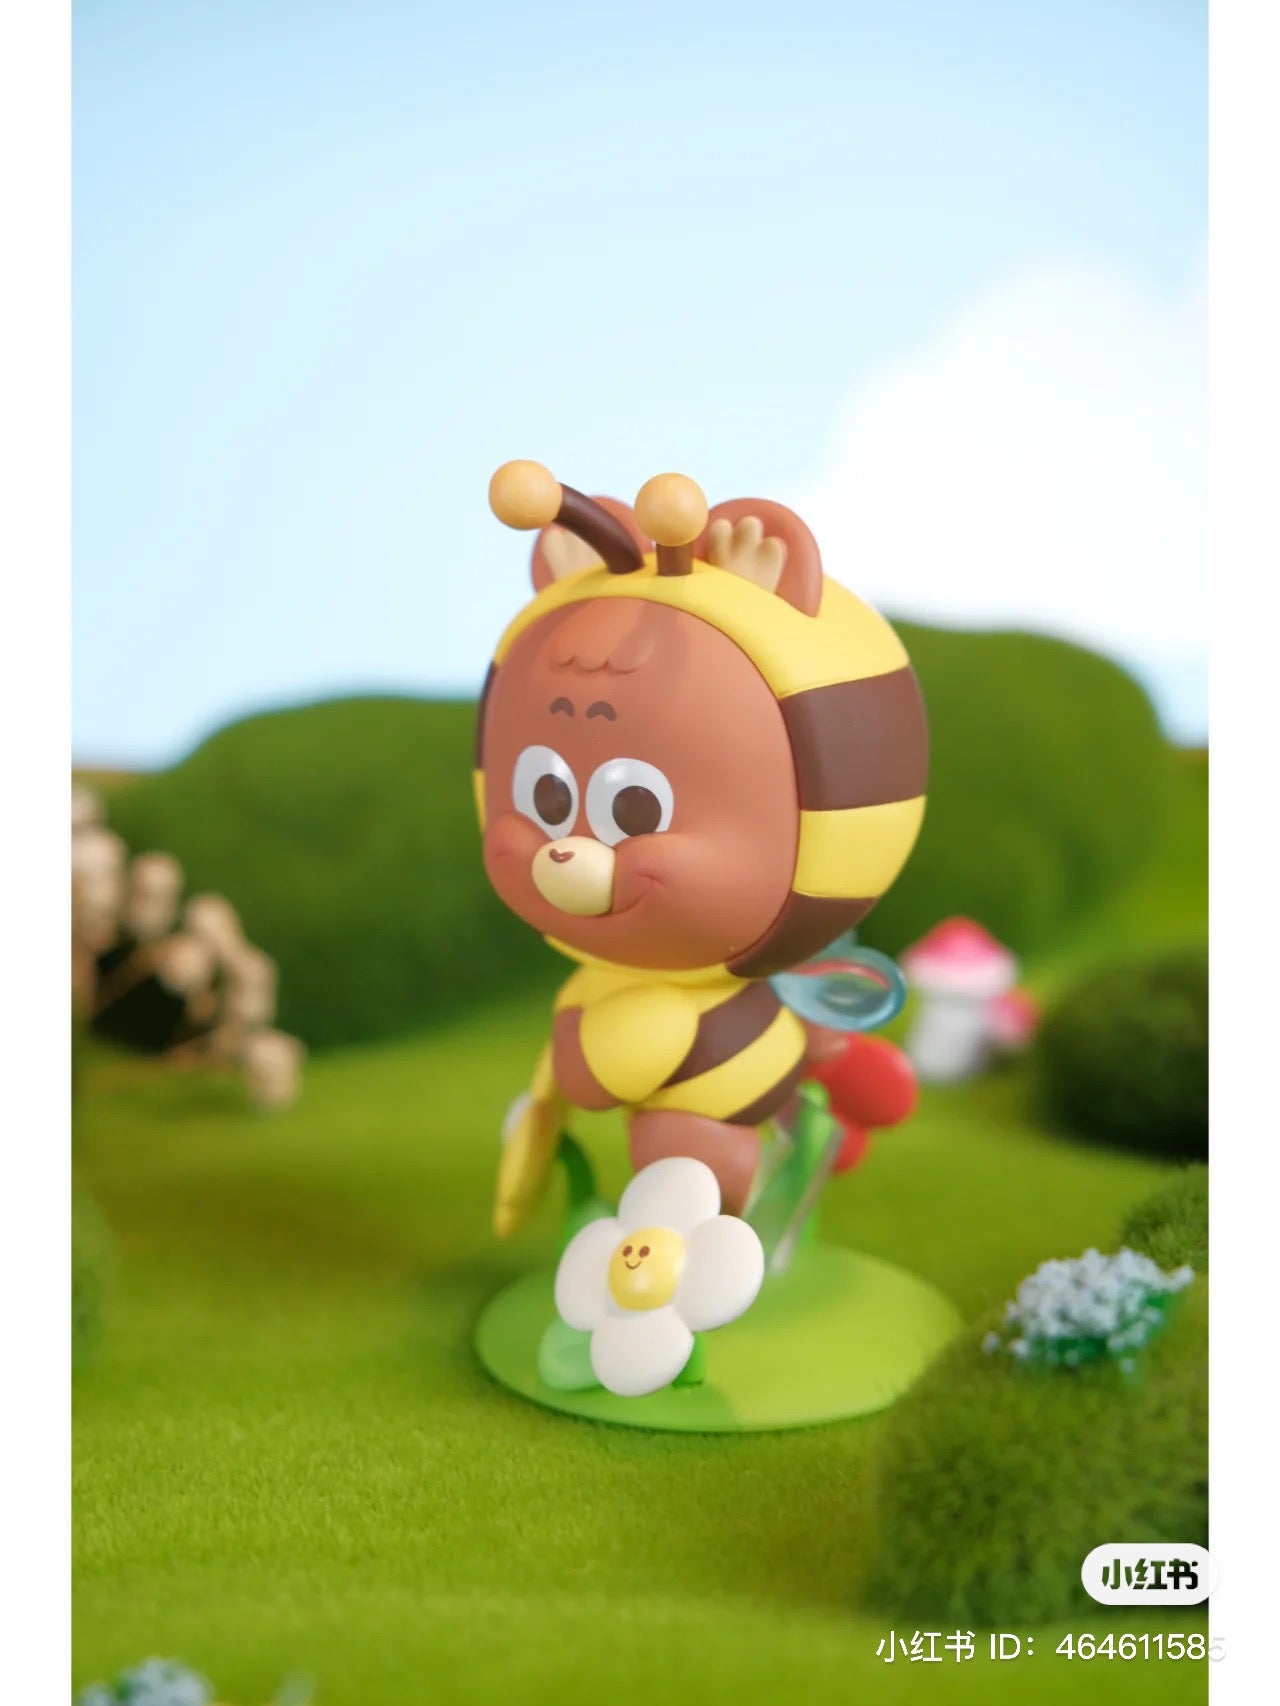 A blind box series featuring HAPPY & COCKY toy bee designs, including 6 regular and 1 secret variant. Preorder now for June 2024 shipment.